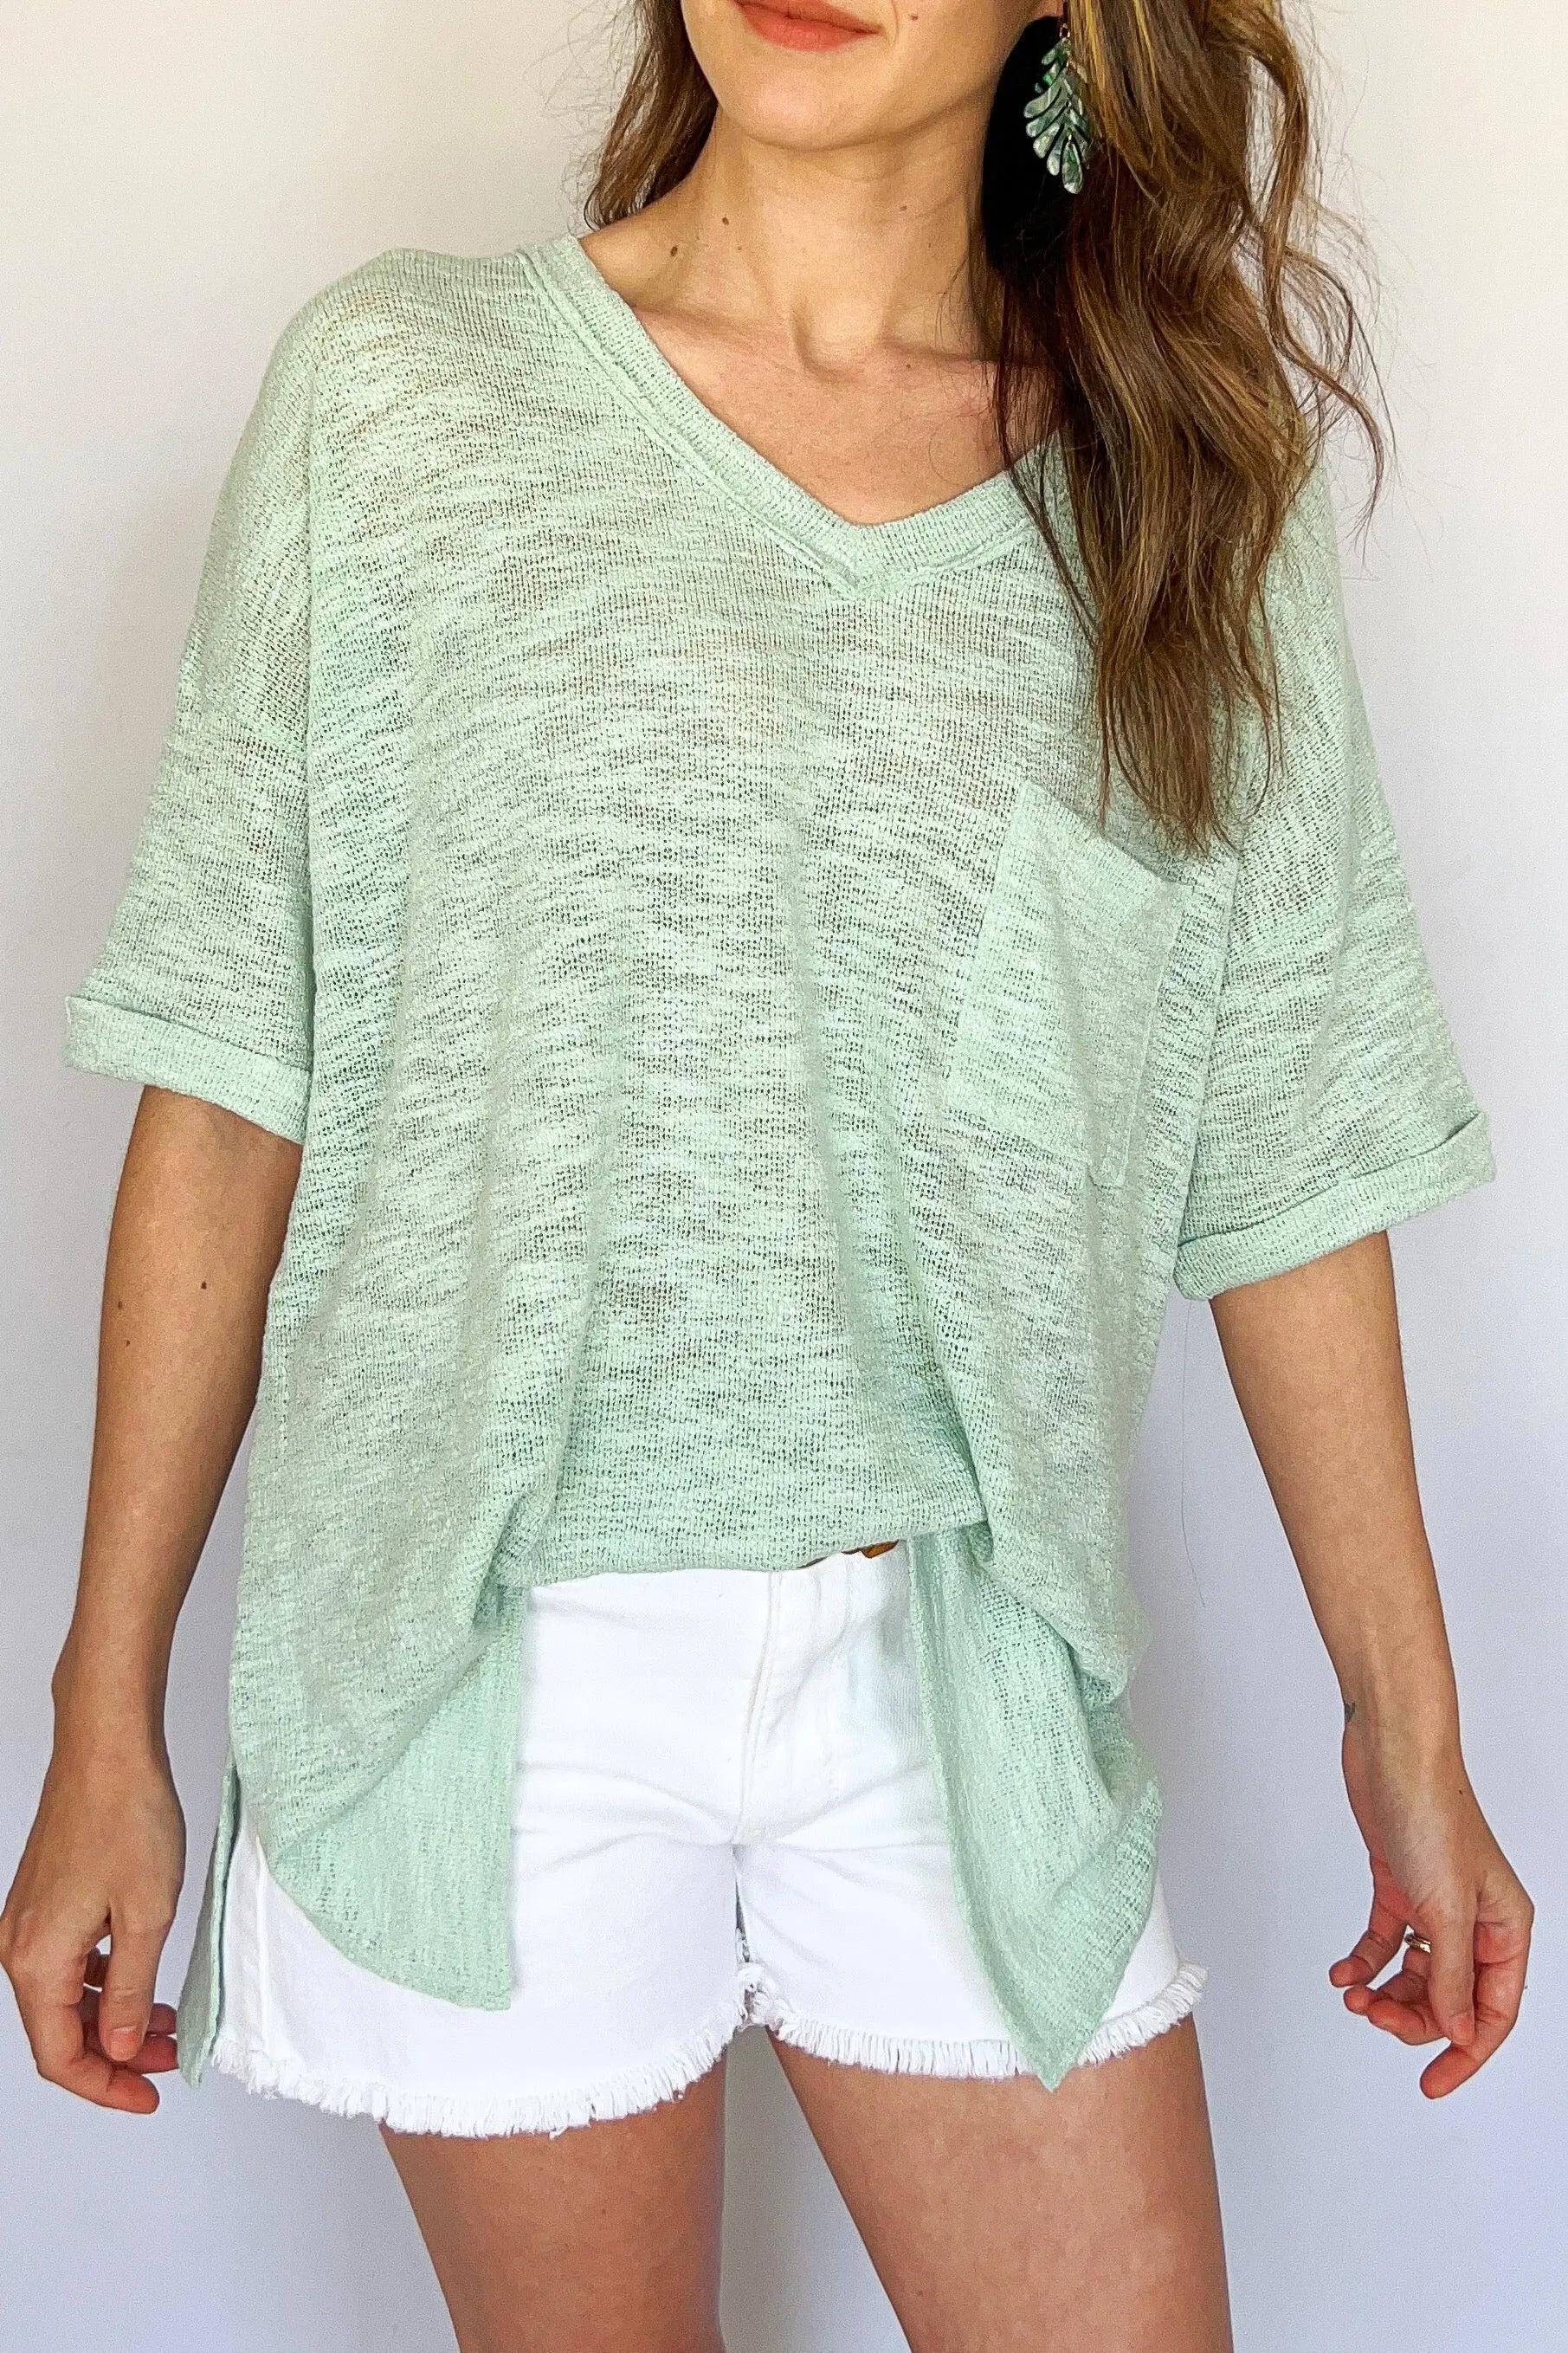 The Tiny Details Mint Relaxed Short Sleeve Pocket Tee